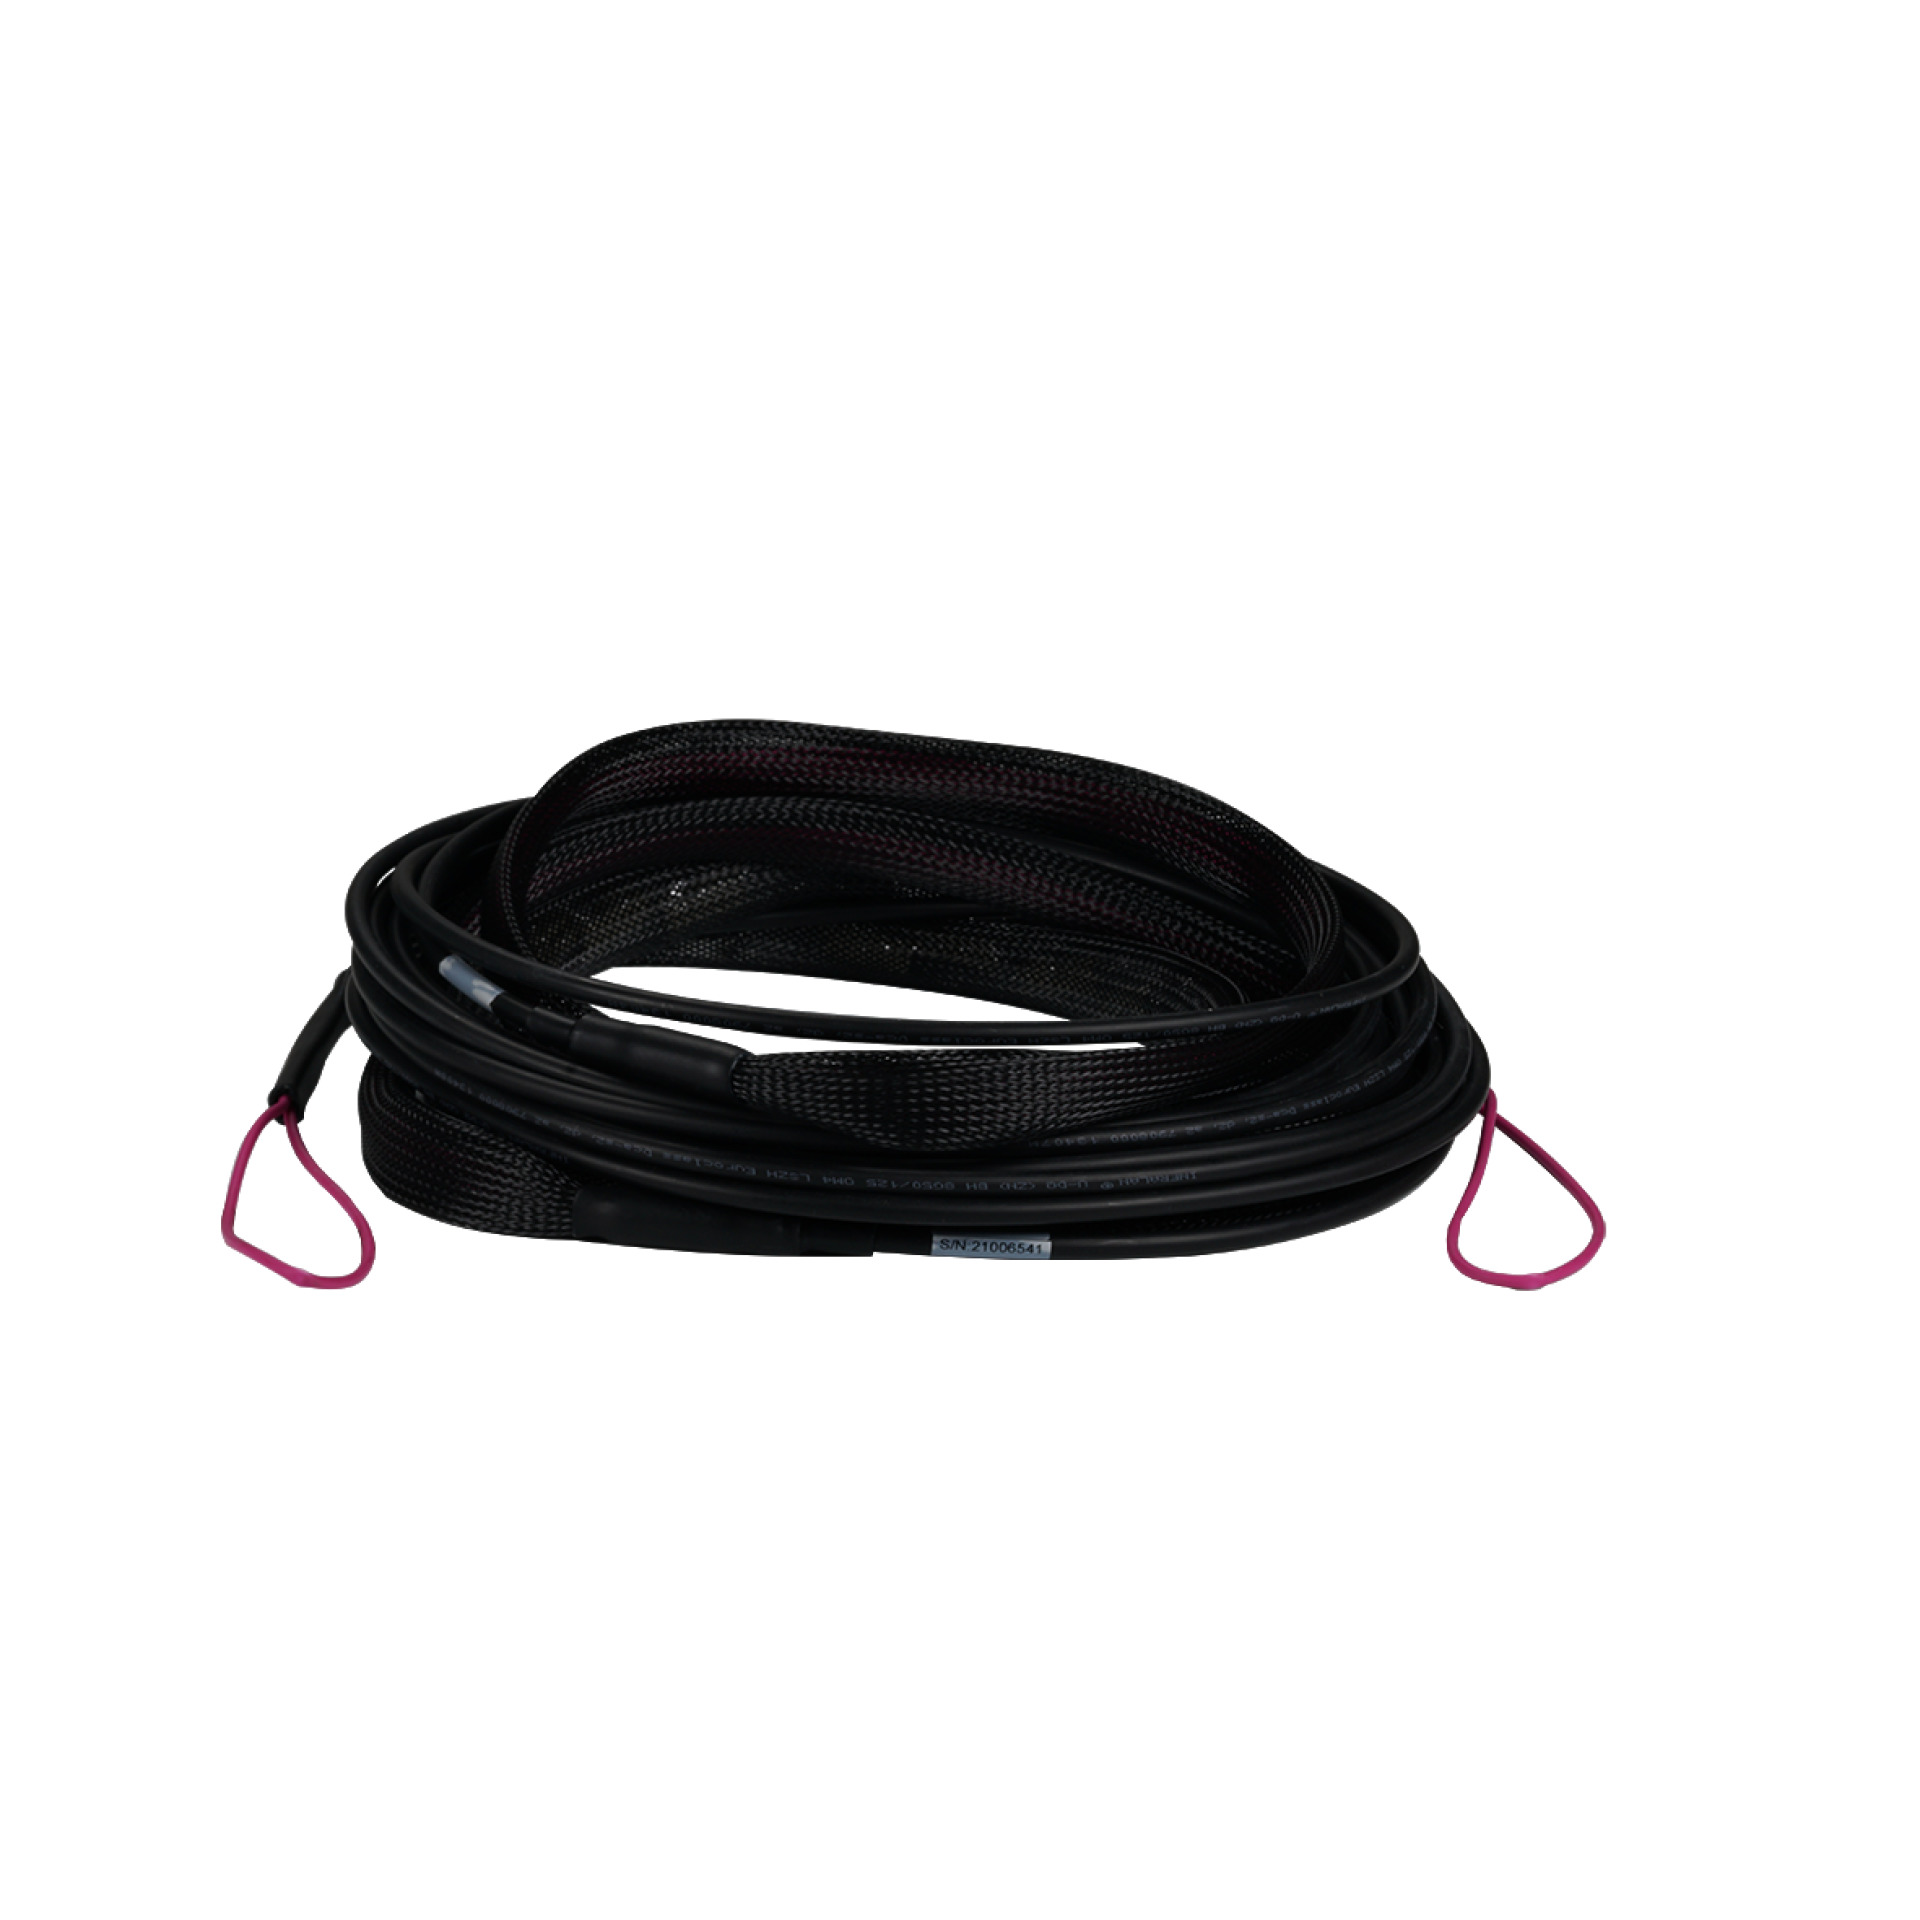 Trunk cable U-DQ(ZN)BH 4G 50/125, SC/SC OM4 90m